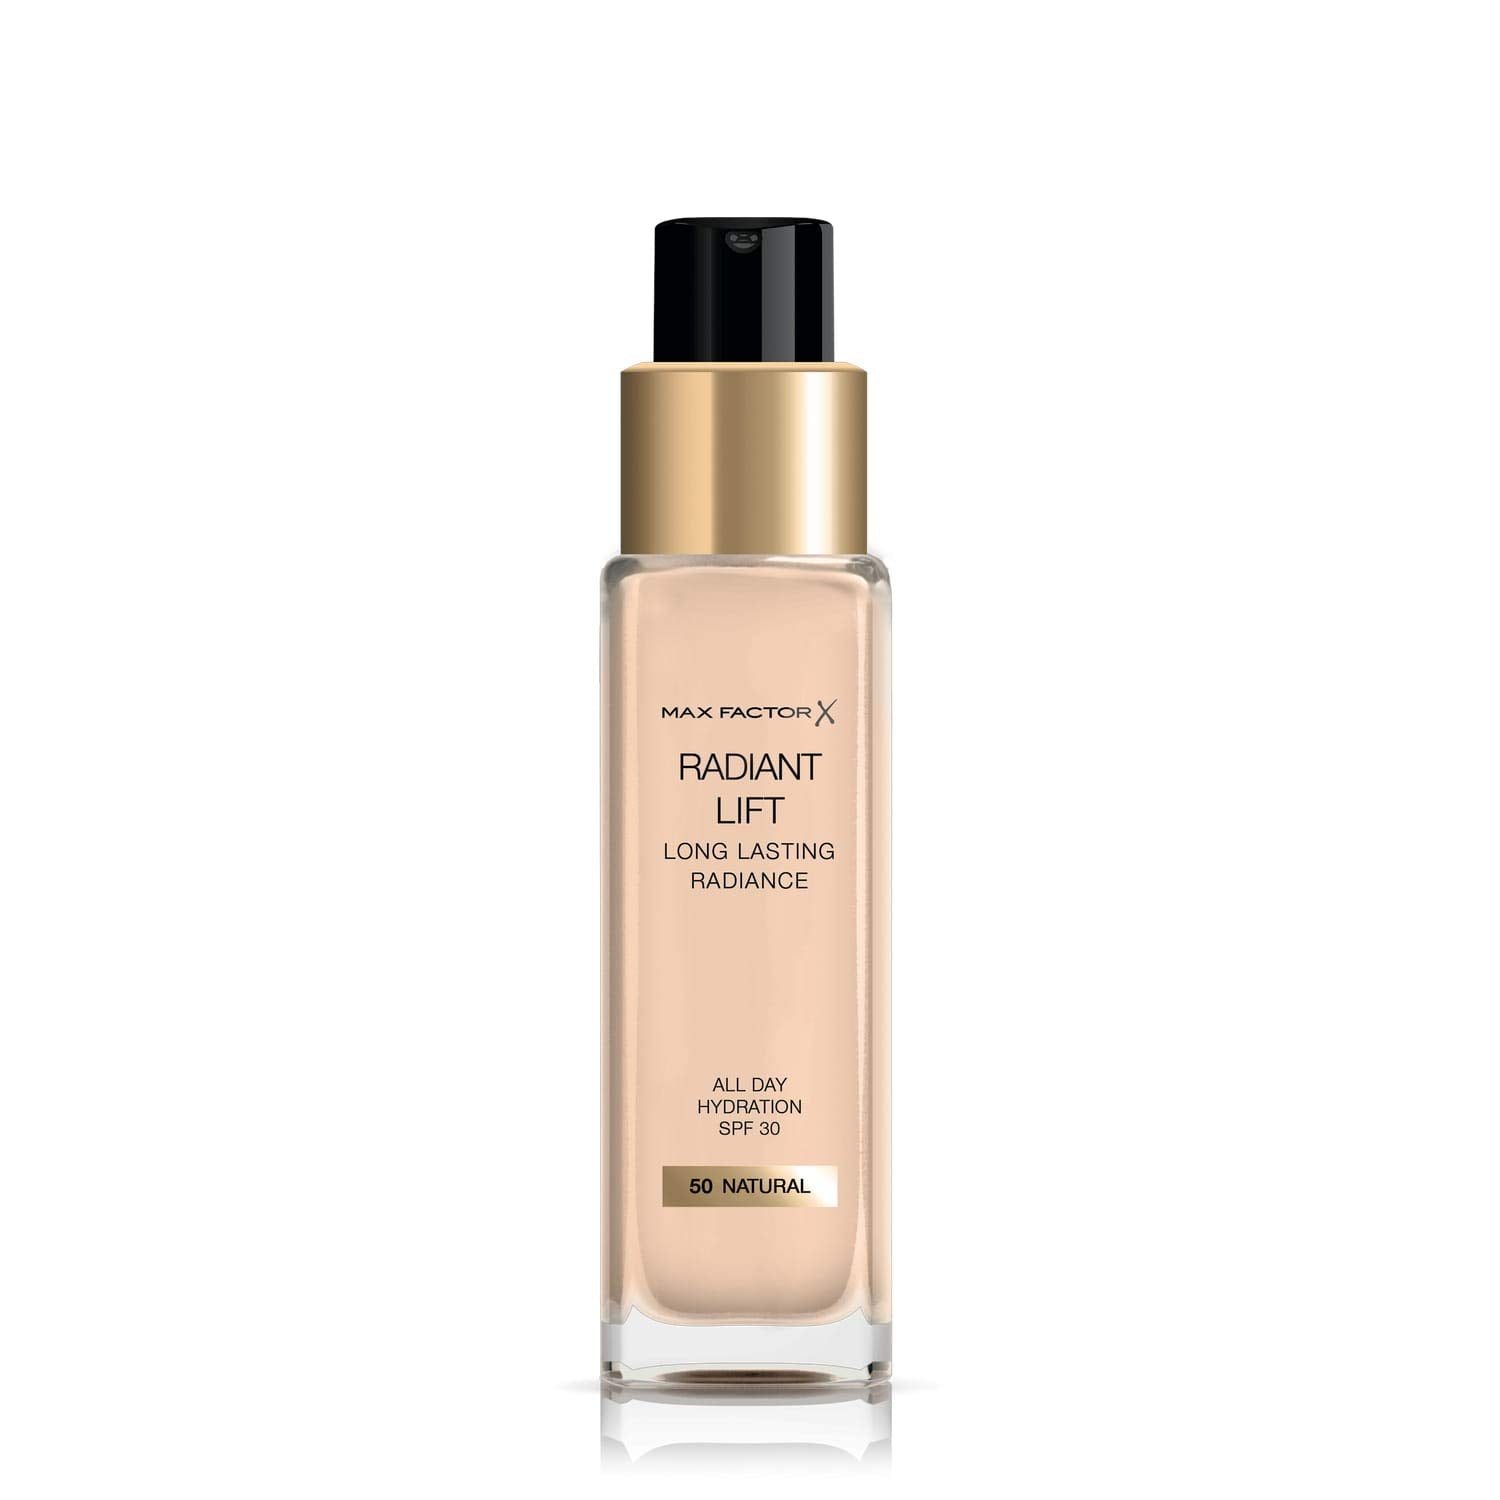 Max Factor Radiant Lift Liquid Pump Medium to Full Coverage Radiant Finish Foundation with SPF30 and Hyaluronic Acid, 050 Natural, Medium Skin Tone, 30ml